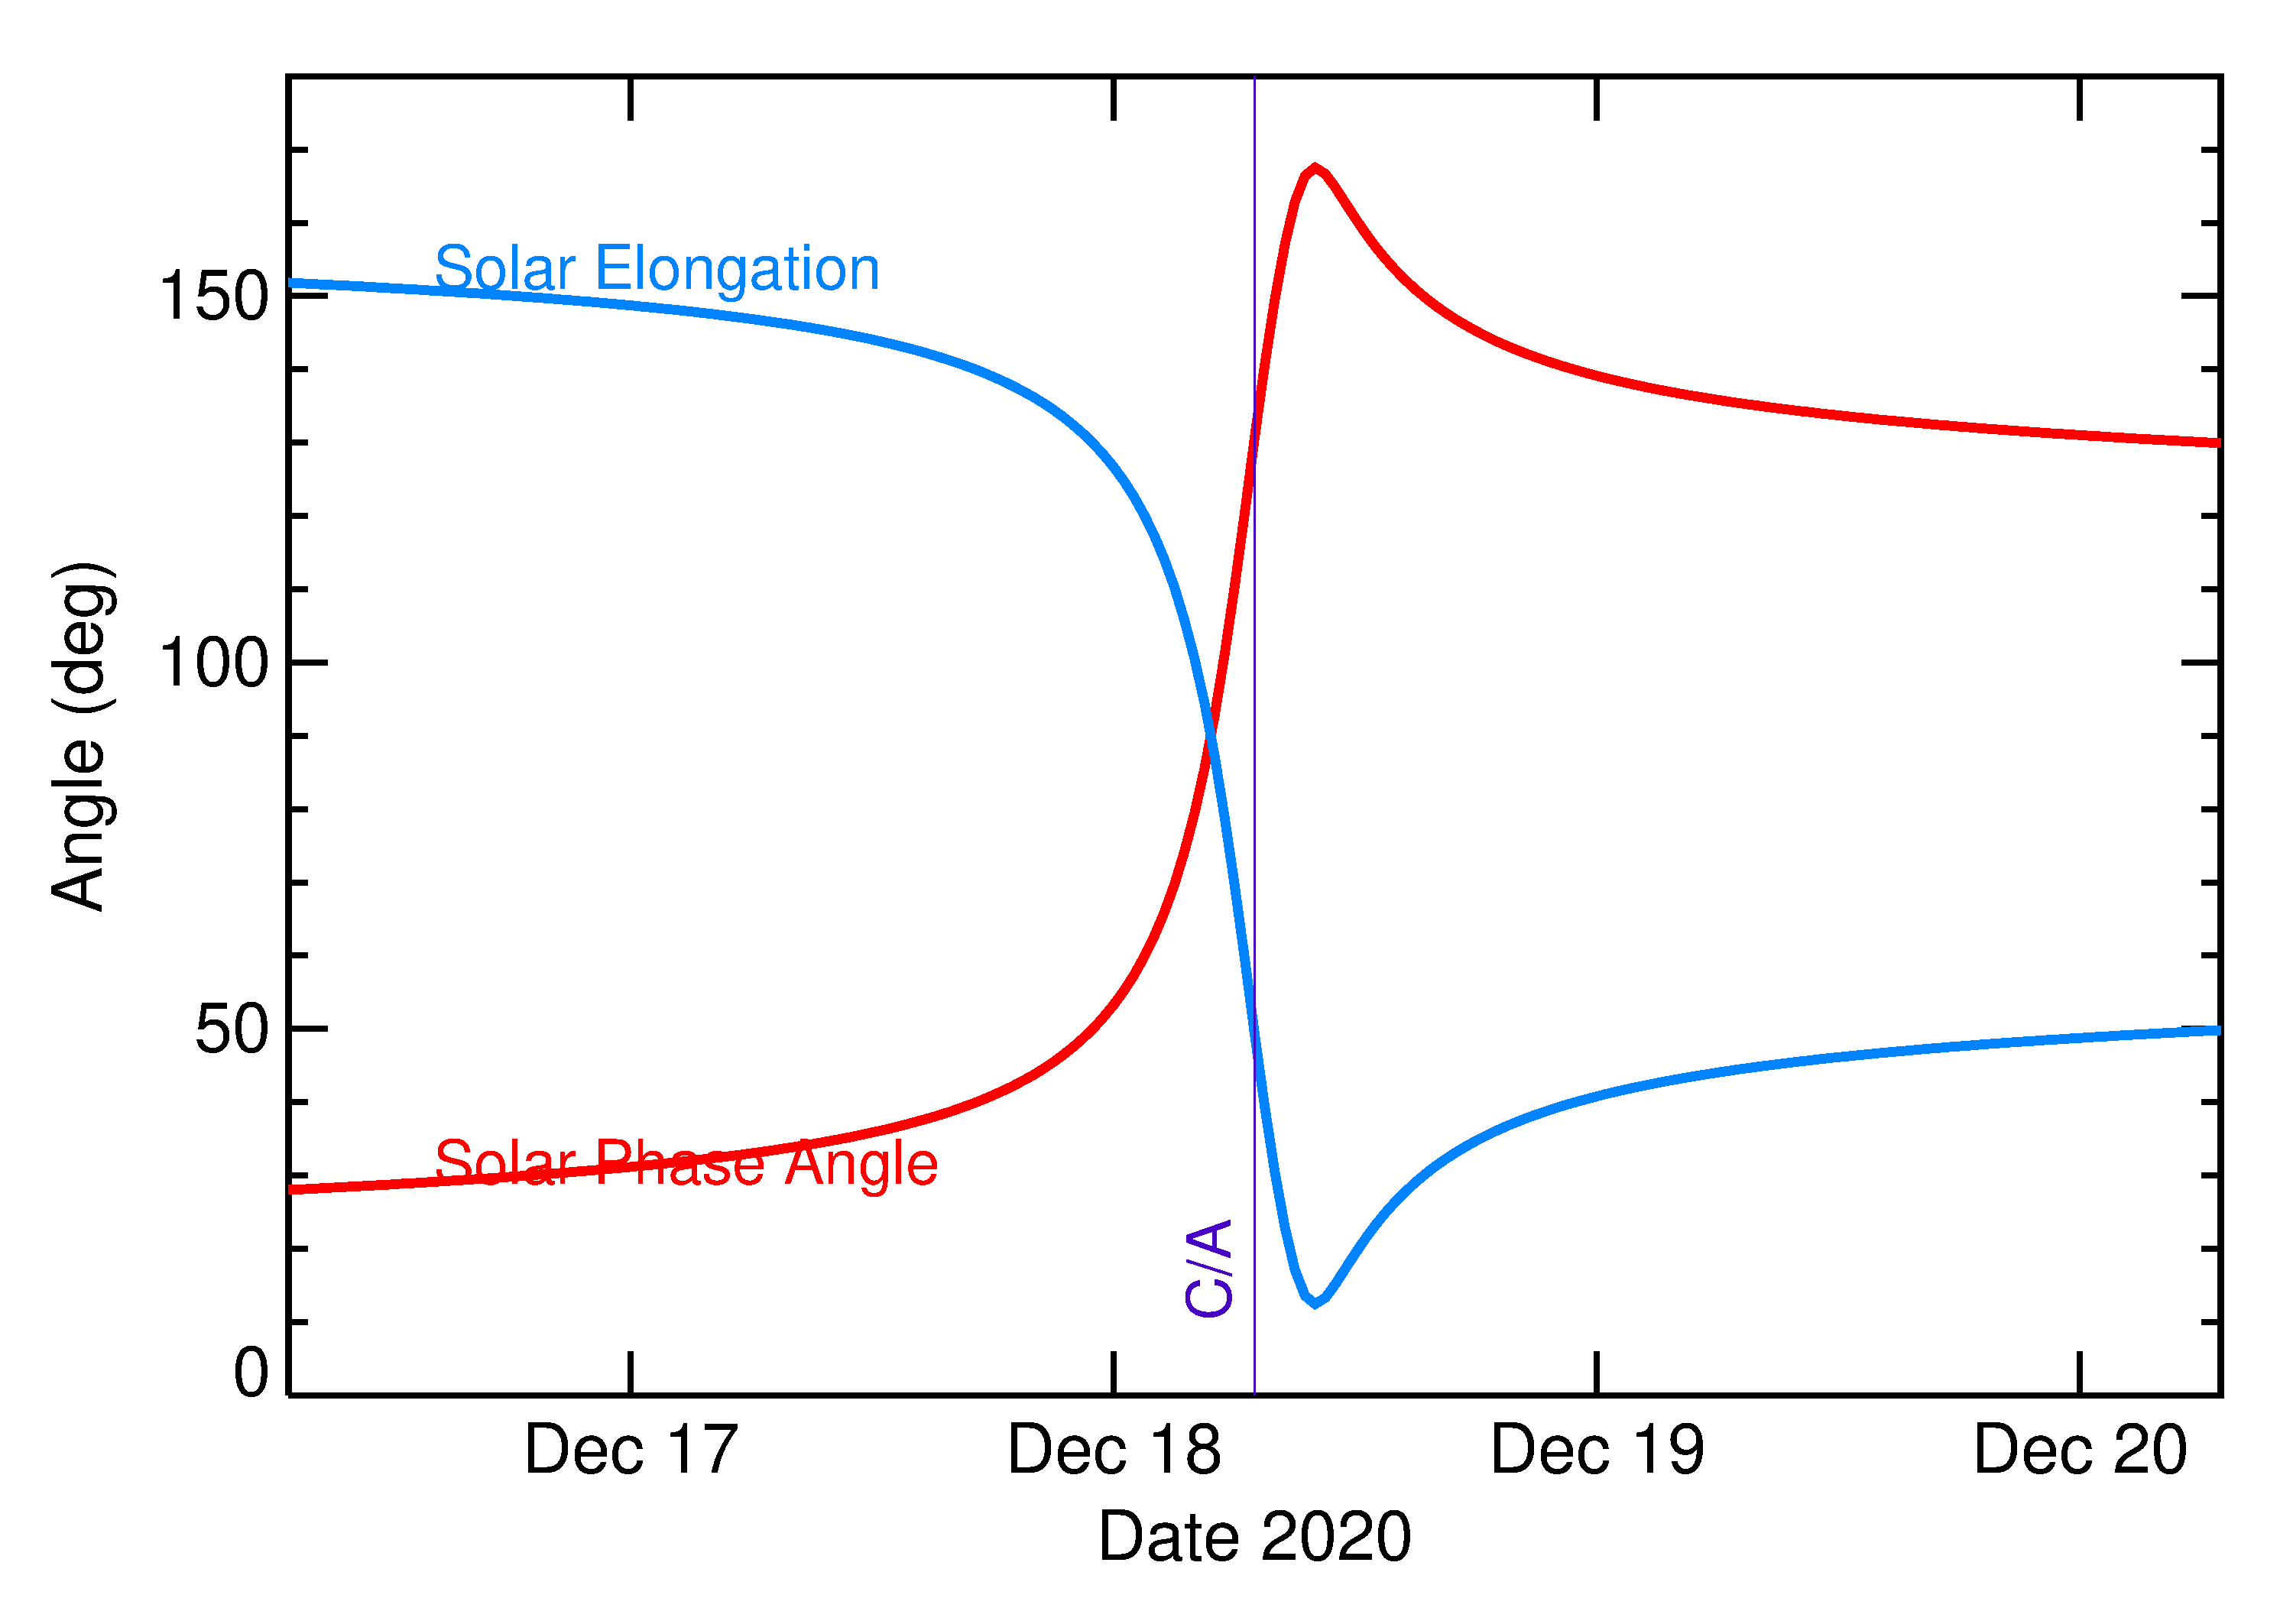 Solar Elongation and Solar Phase Angle of 2020 XX3 in the days around closest approach